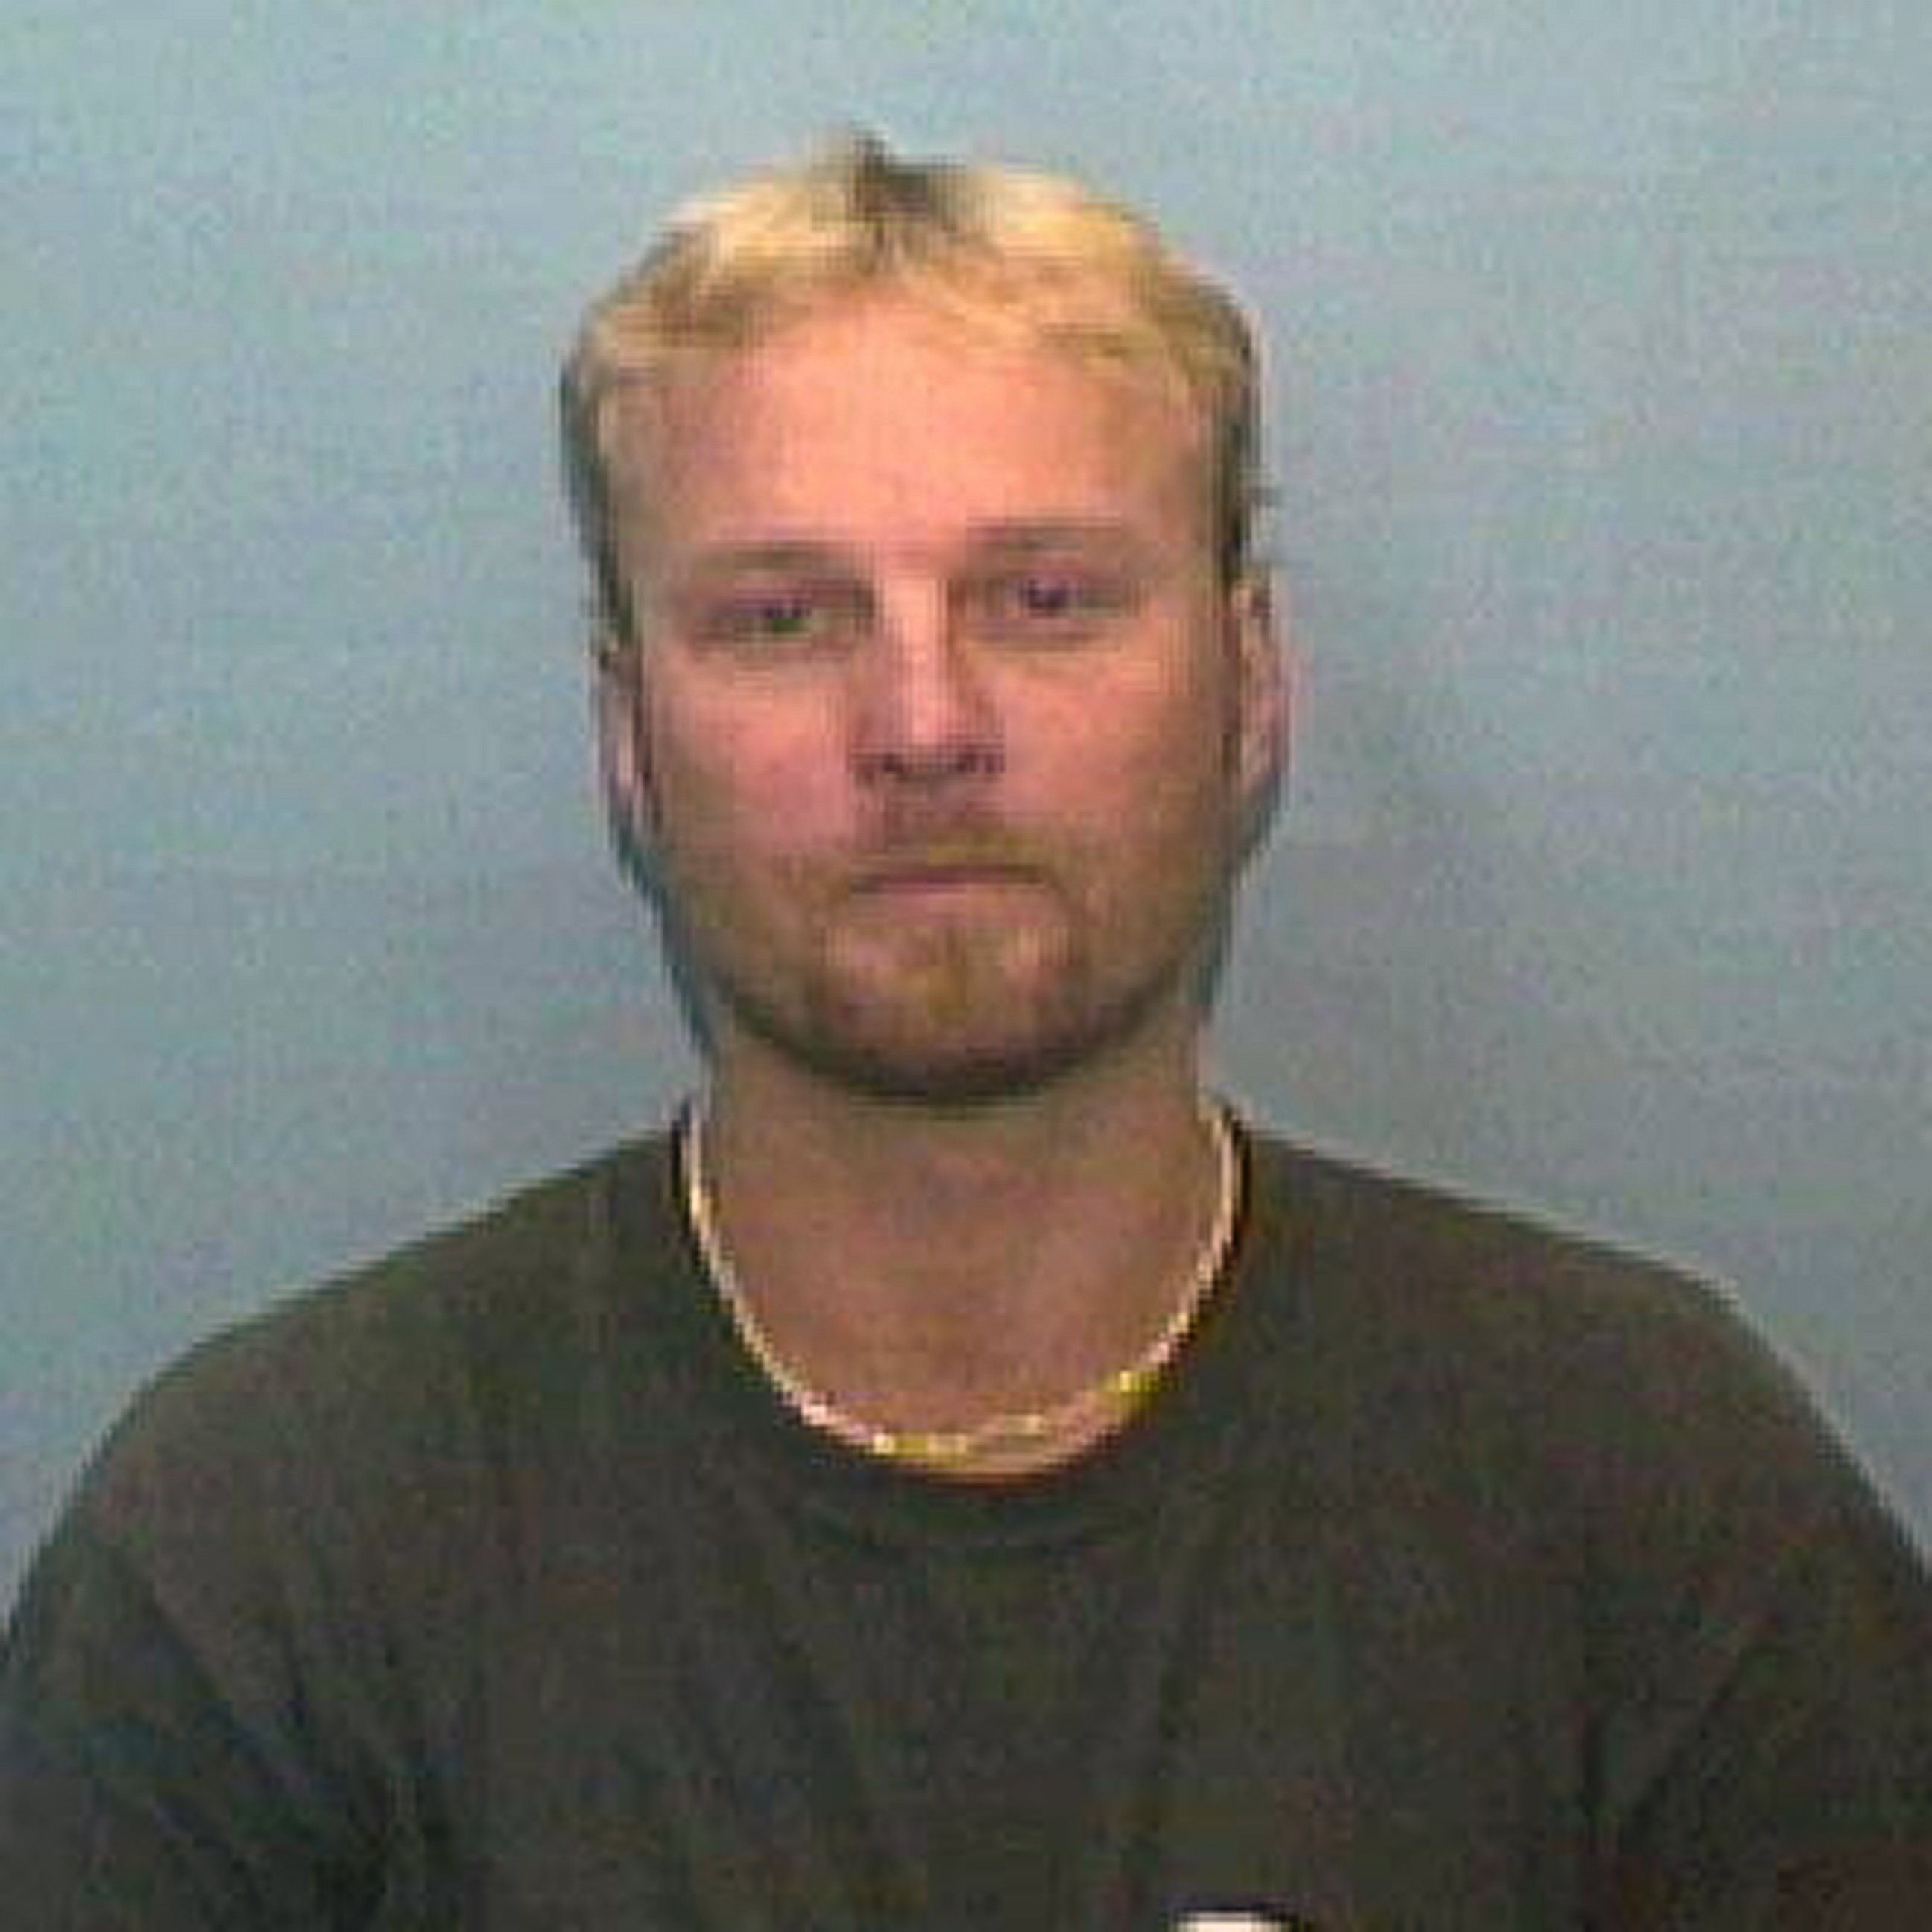 PHOTO: This undated photo made available by the Lima Police Department shows Clifford E. Opperud, who escaped from custody, Sept. 11, 2014.